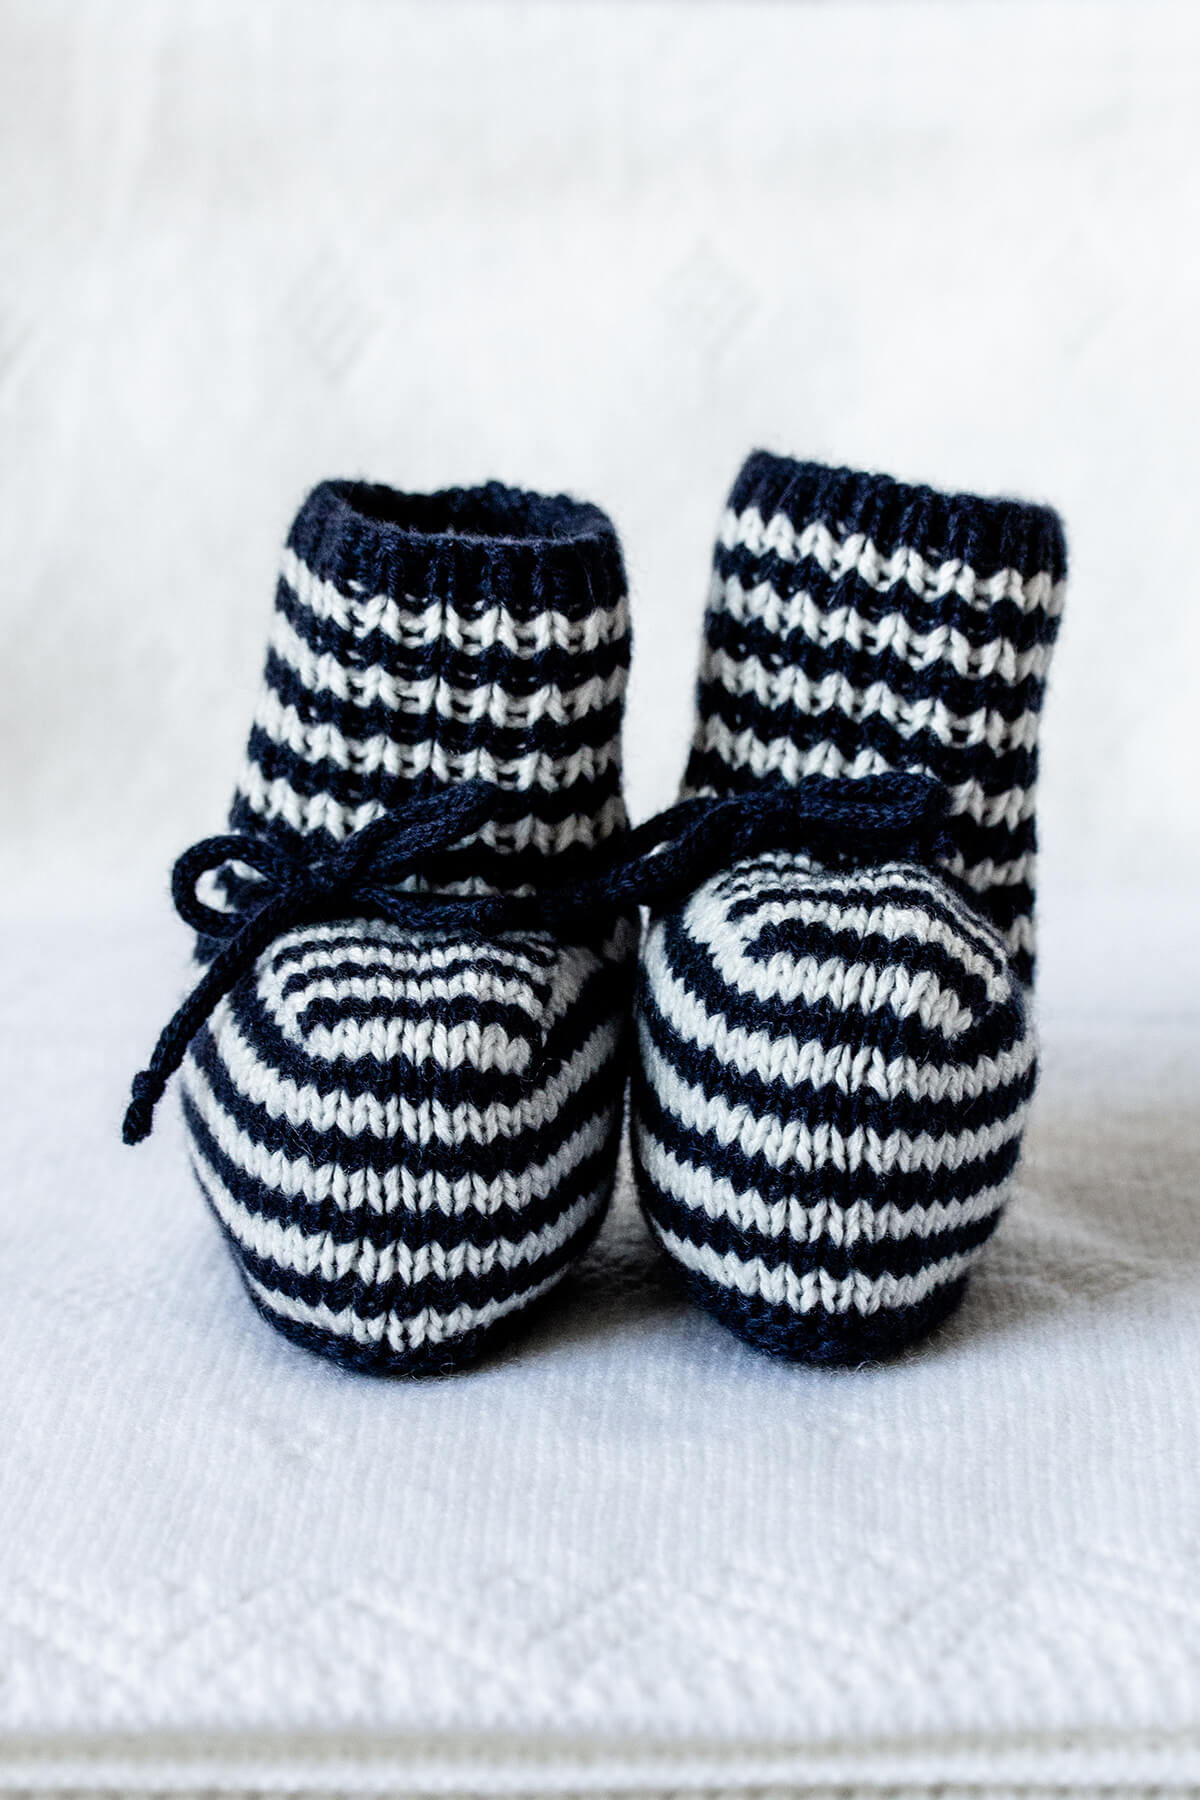 Johnstons of Elgin Hand Knitted Cashmere Baby Booties with crotched trims in Navy & White on a white Baby Blanket background 746330333